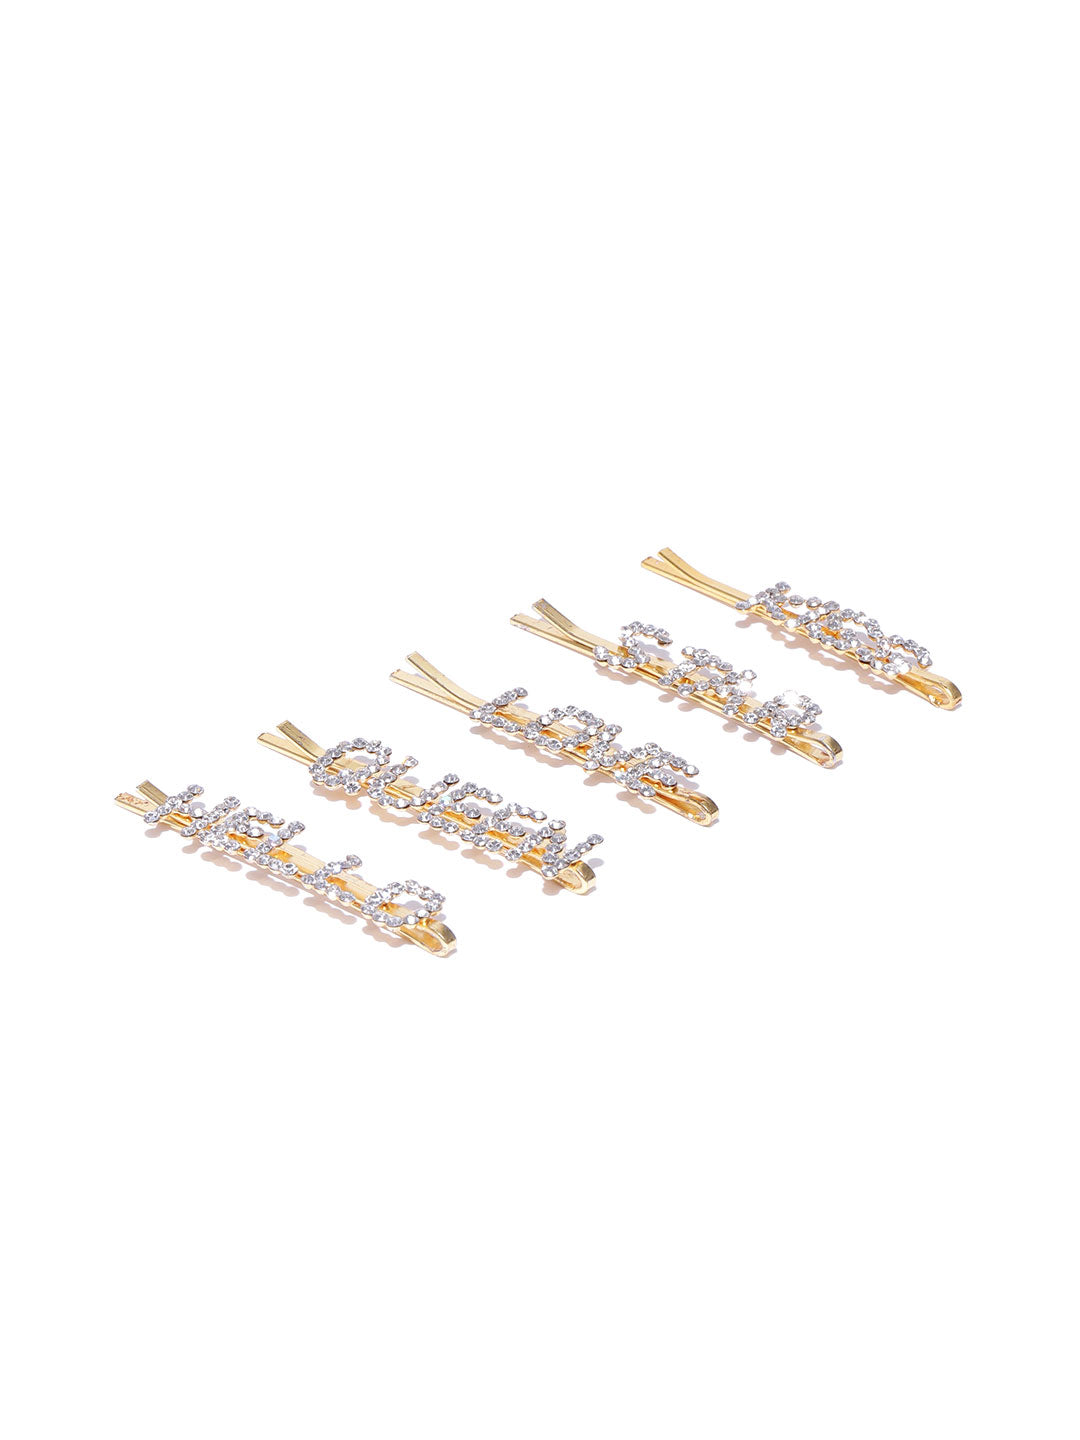 Blueberry set of 5 gold plated bobby pins